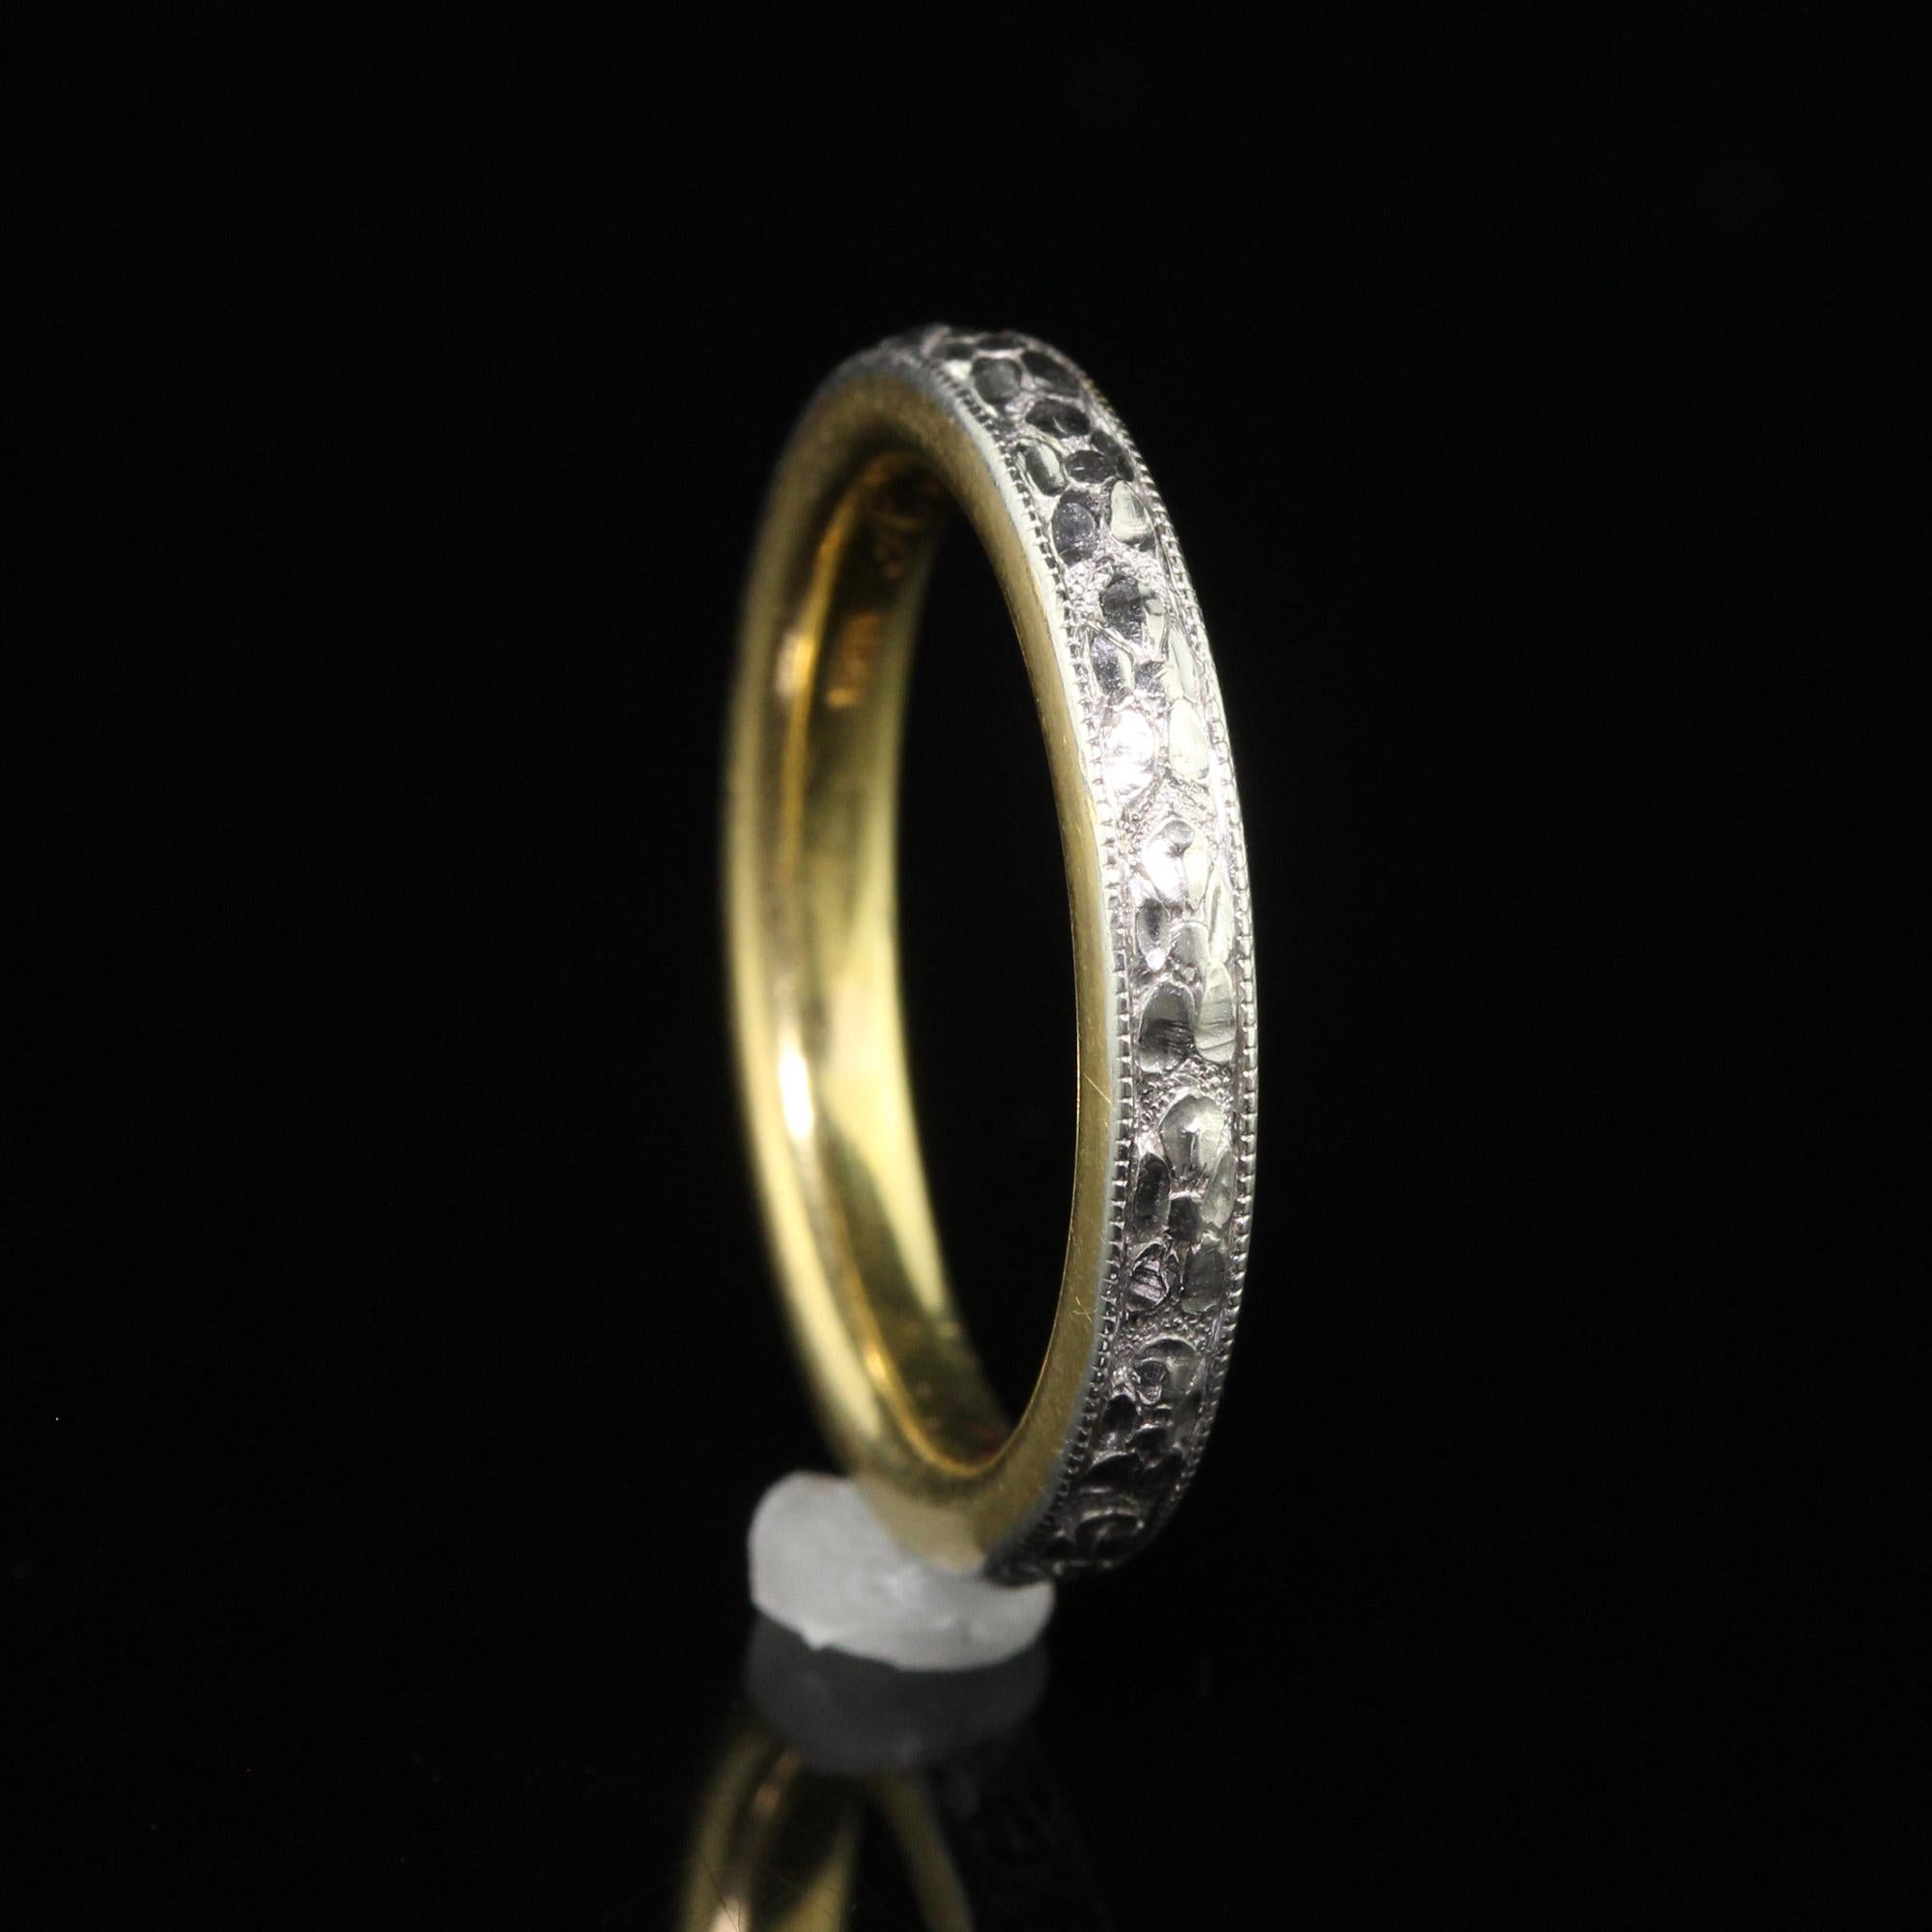 Antique Art Deco Platinum and 18K Gold Engraved Wedding Band Circa 1917 - Size 5 For Sale 3